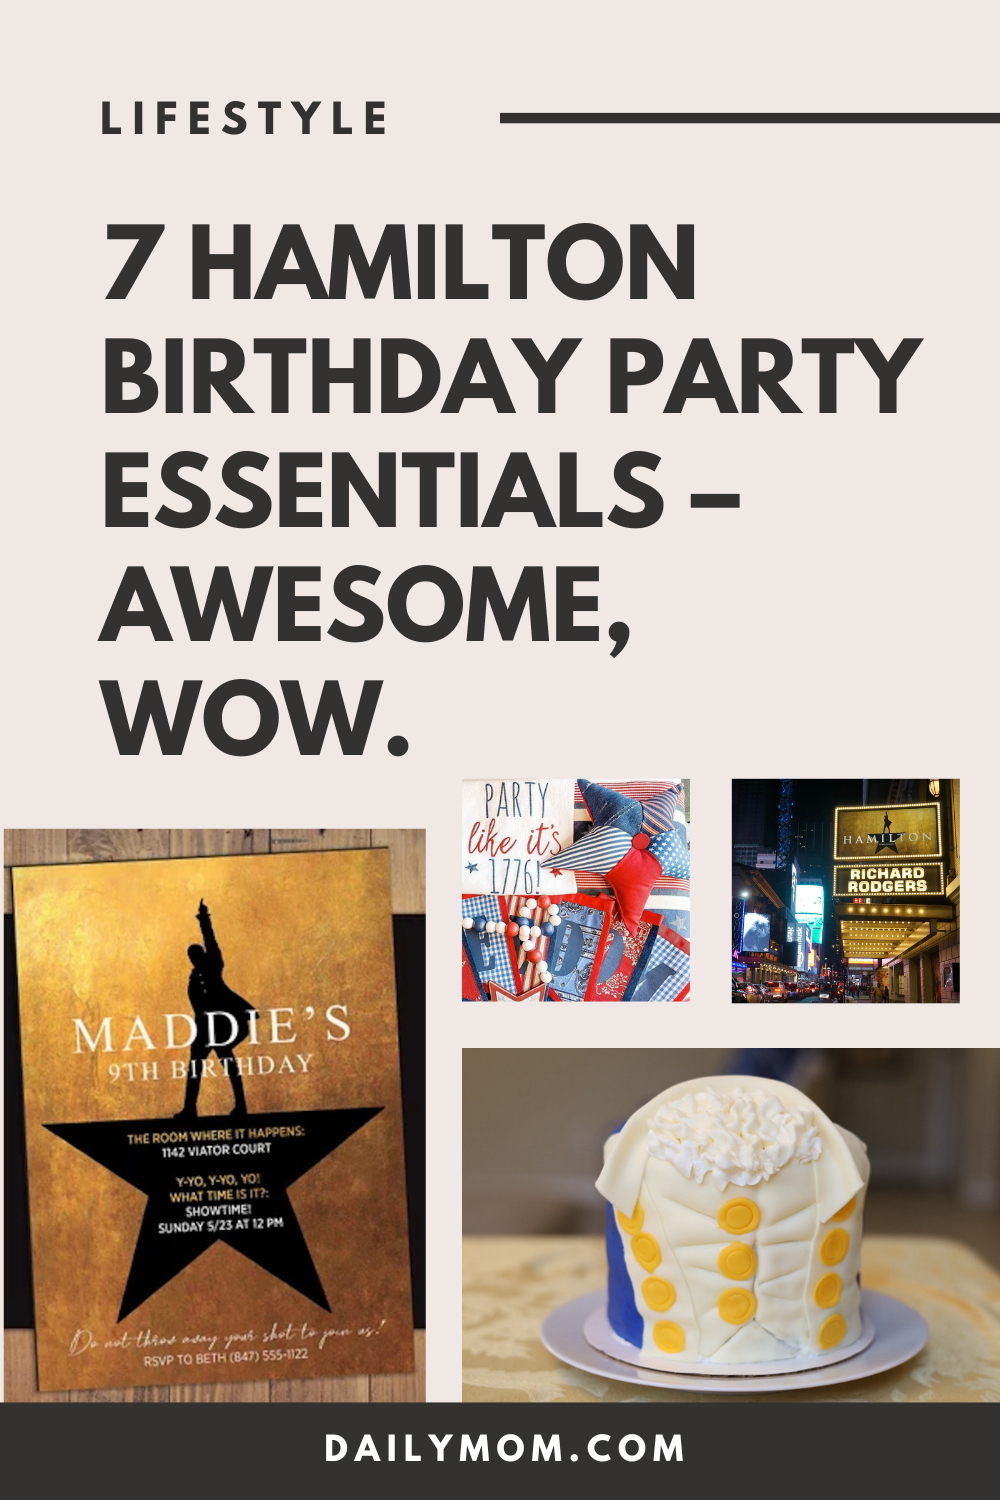 7 Hamilton Birthday Essentials For An Epic Party (Awesome, Wow.)